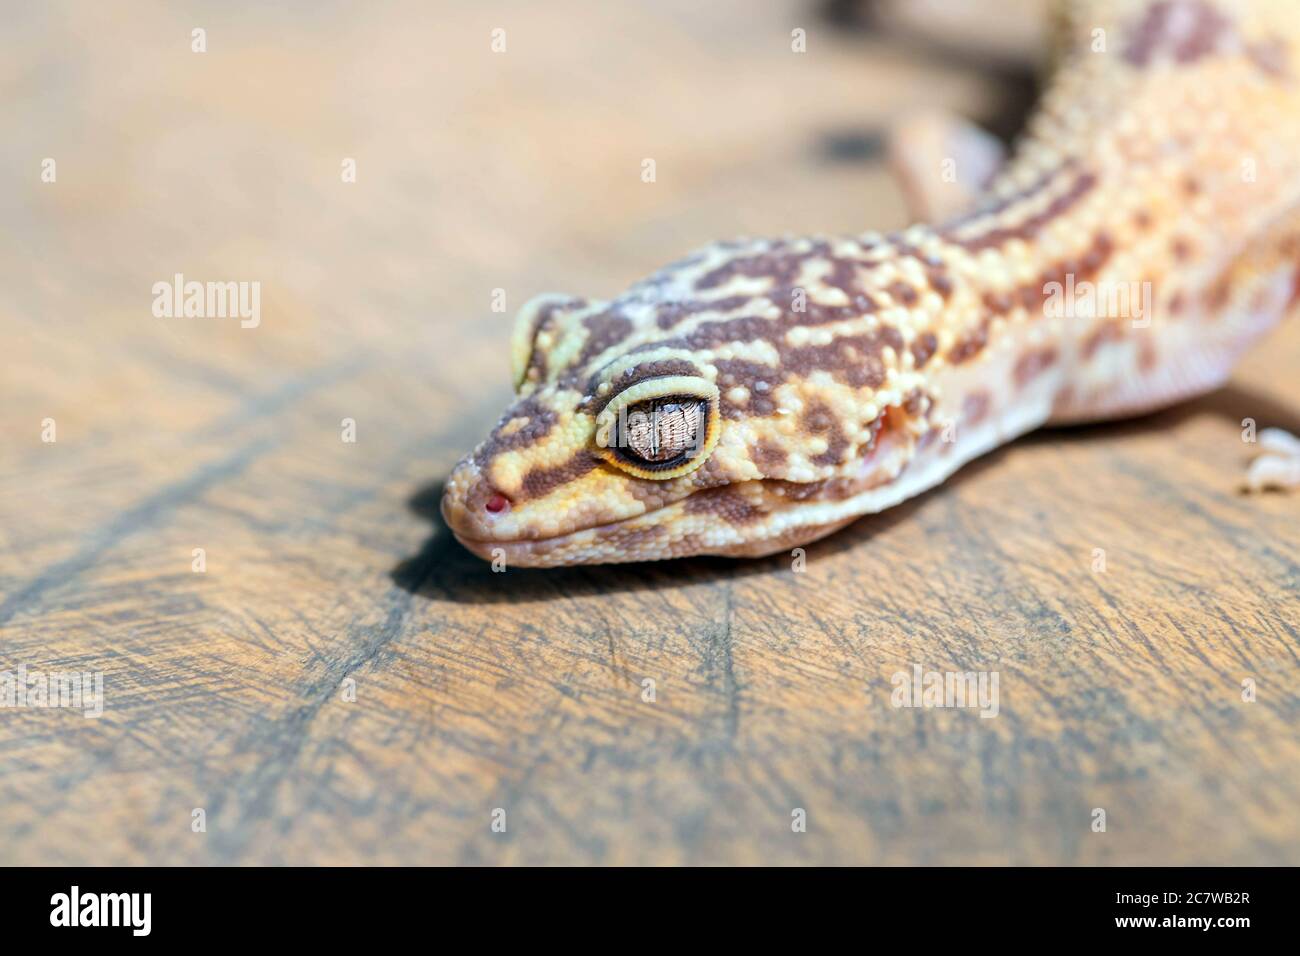 Close up of Leopard Gecko or Eublepharis on wooden surface. Macro. Reptile wallpaper, poster, background Stock Photo